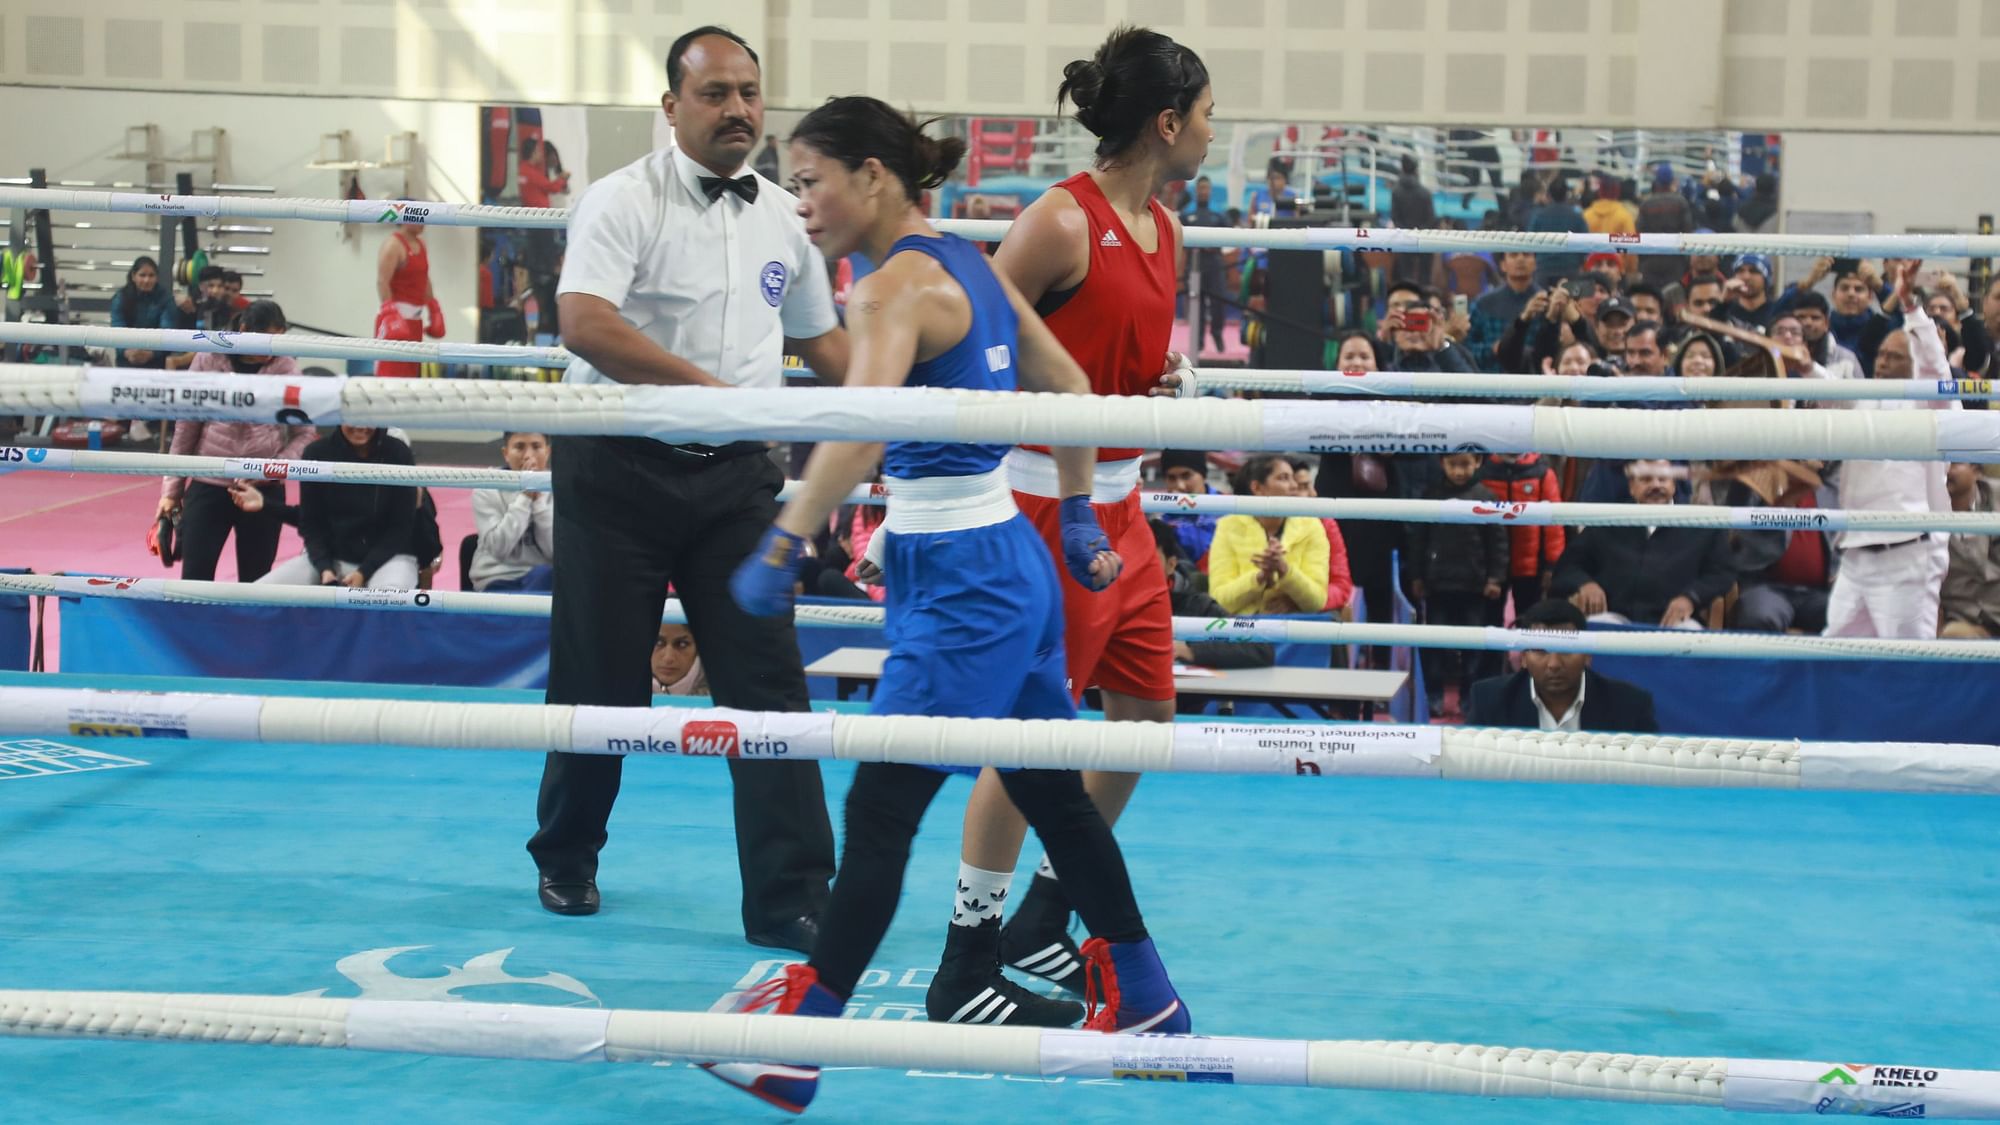 Mary Kom (left) walked off without shaking hands with Nikhat Zareen after the fight on Saturday, 28 December.